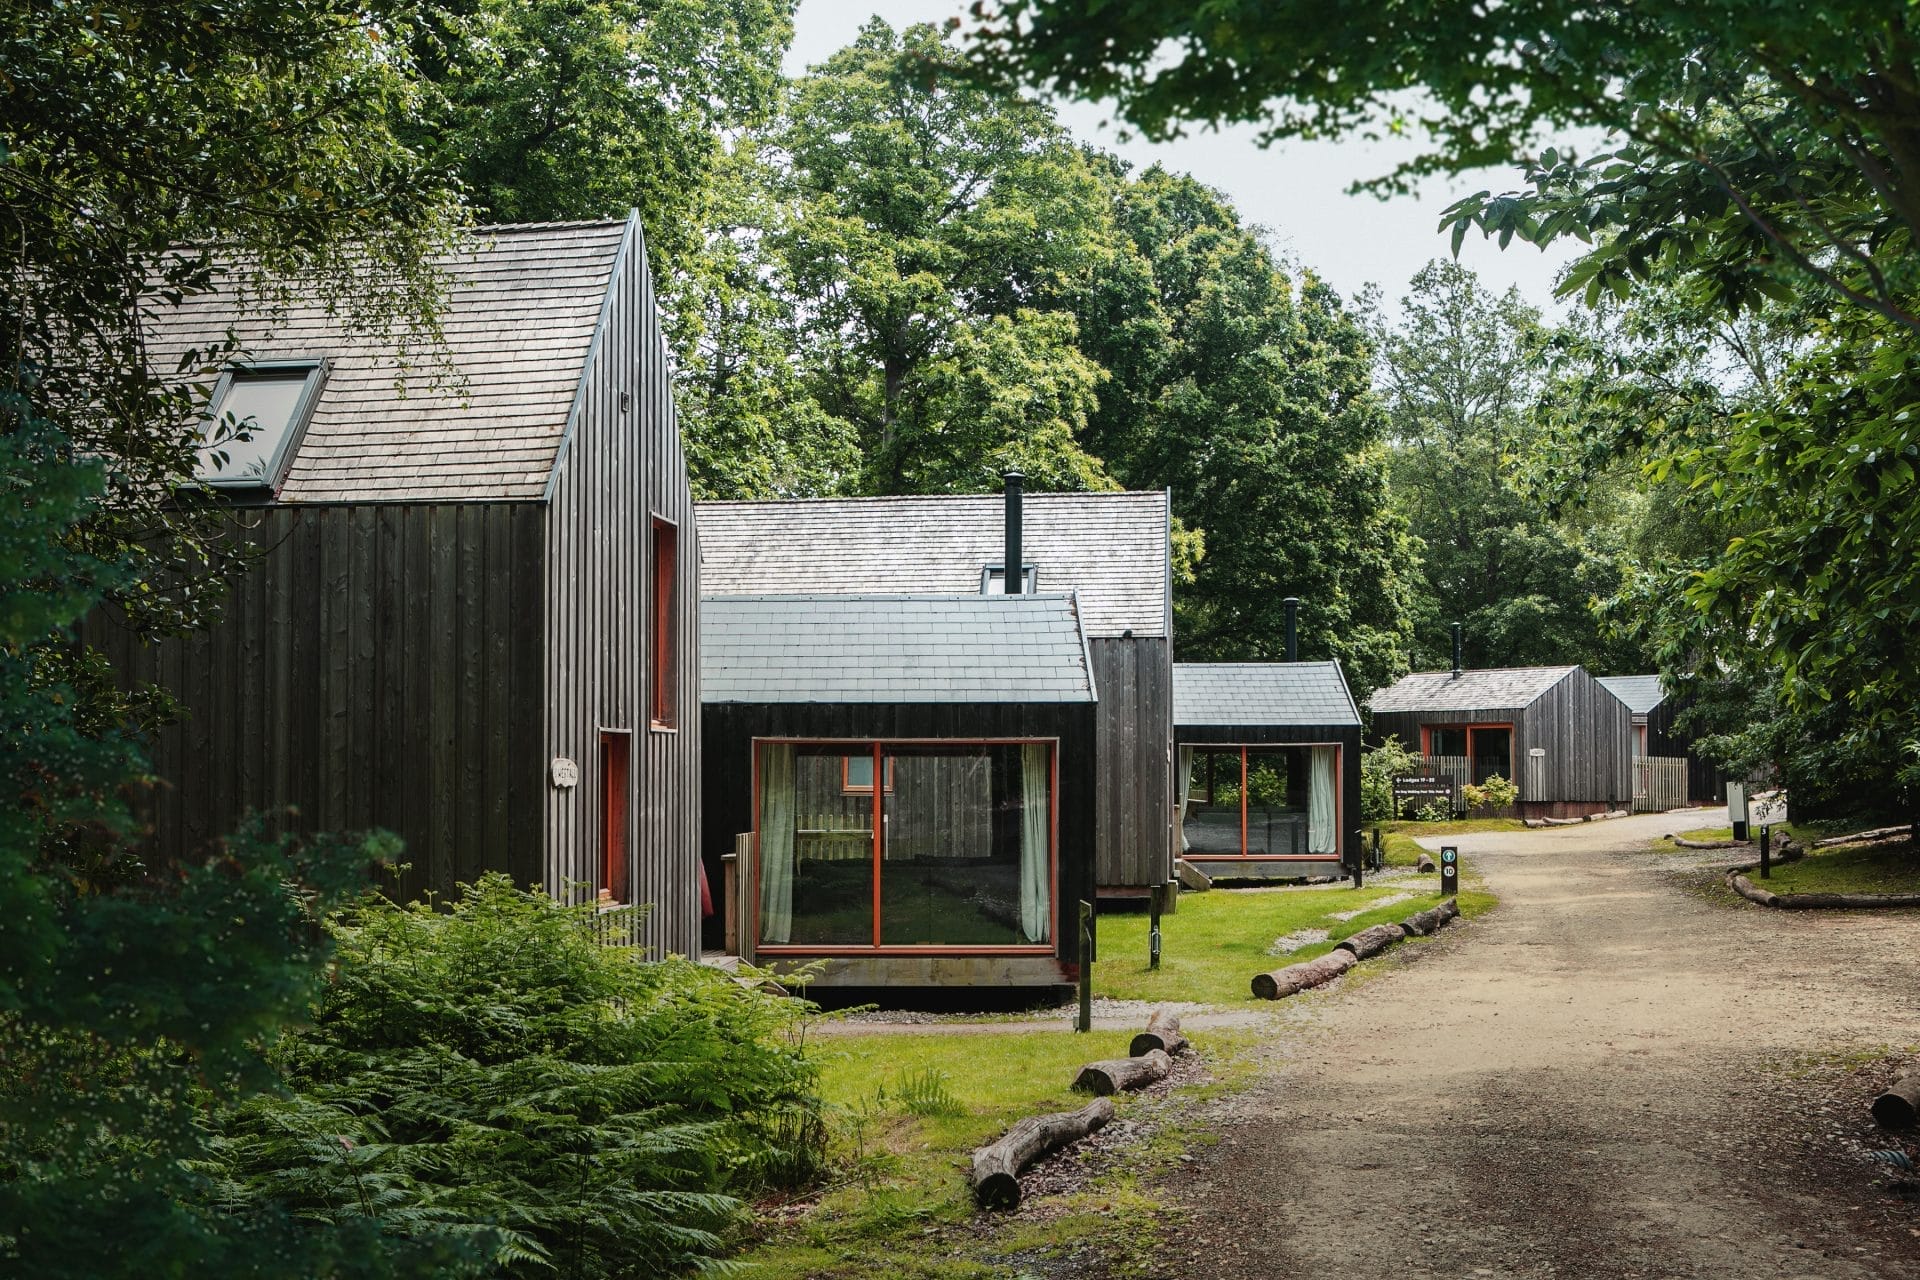 Contemporary architectural lodges nestled in a forest campsite, blending seamlessly with the natural surroundings. Stickland Wright Architecture and Interior Design